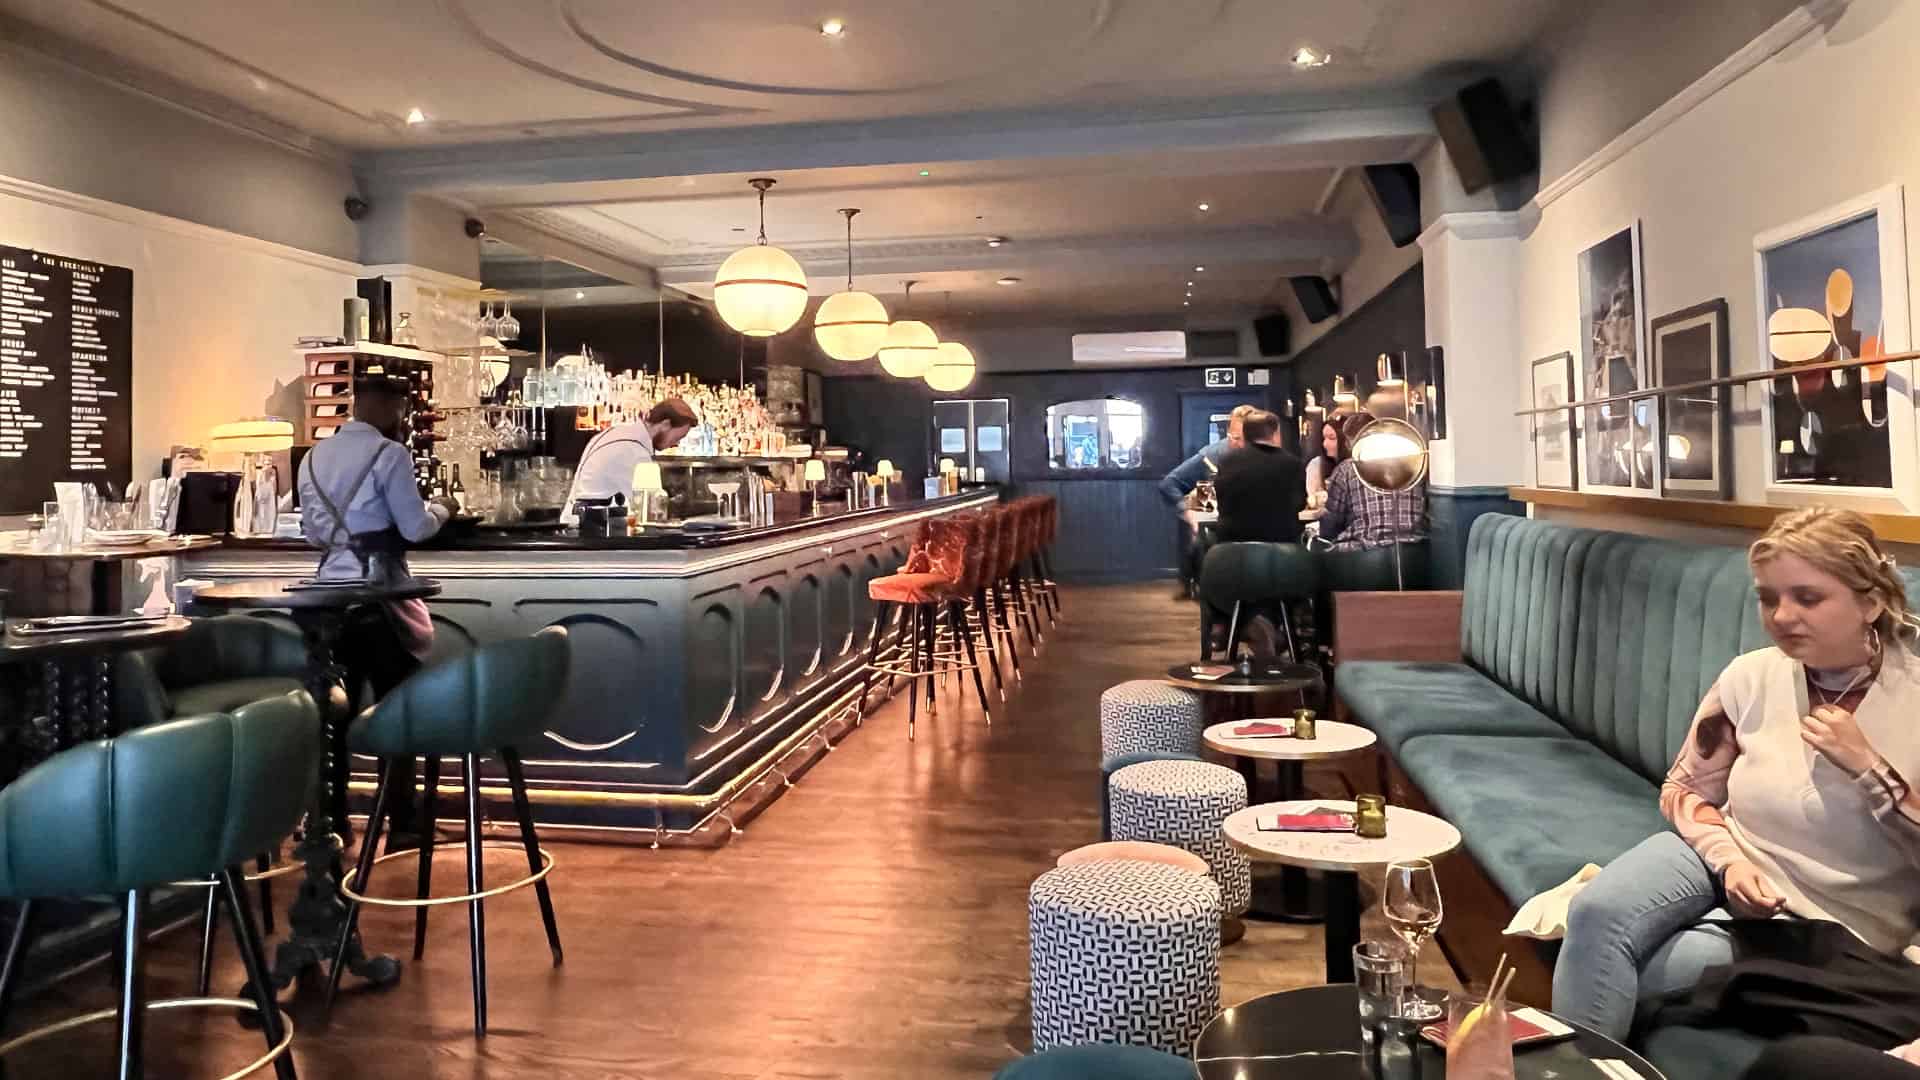 View of the bar and seating area with bartender behind the bar at Lockes Bar in Covent Garden, London